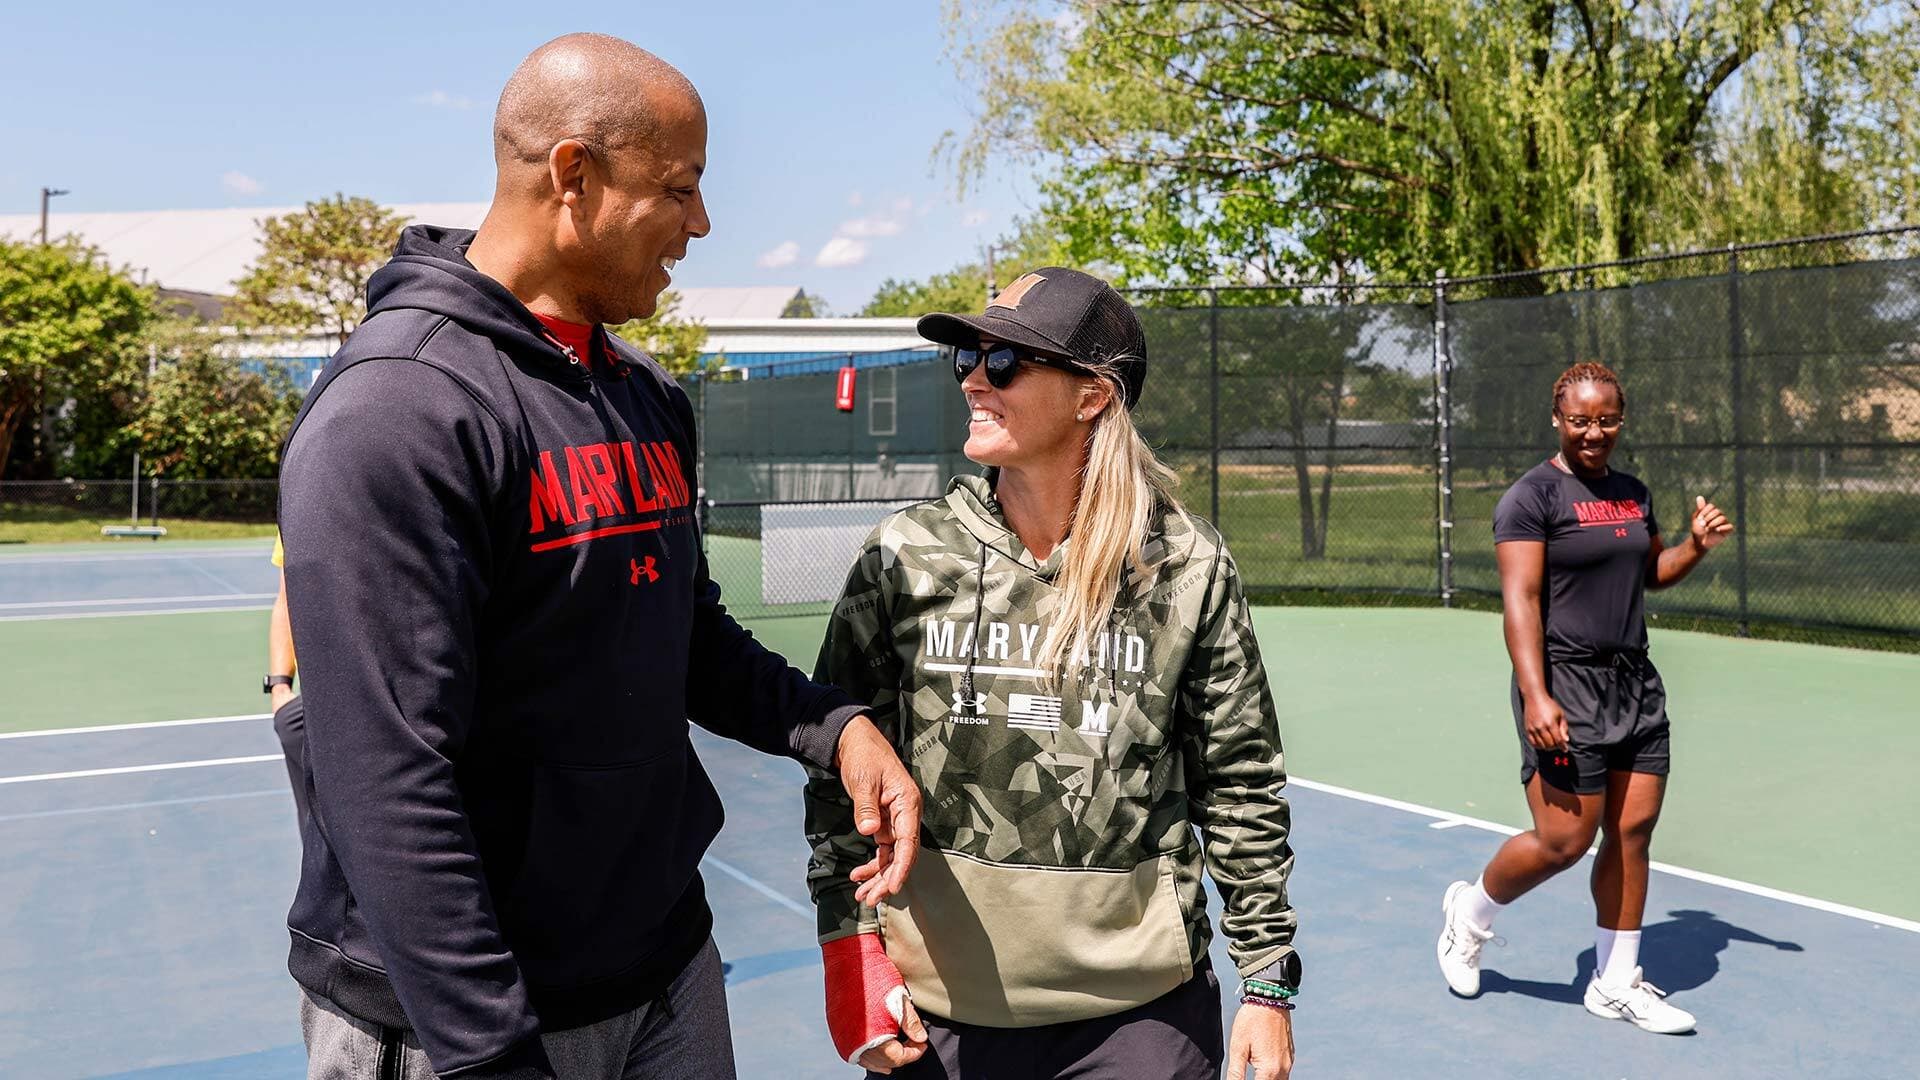 Evans talks to a woman on a tennis court